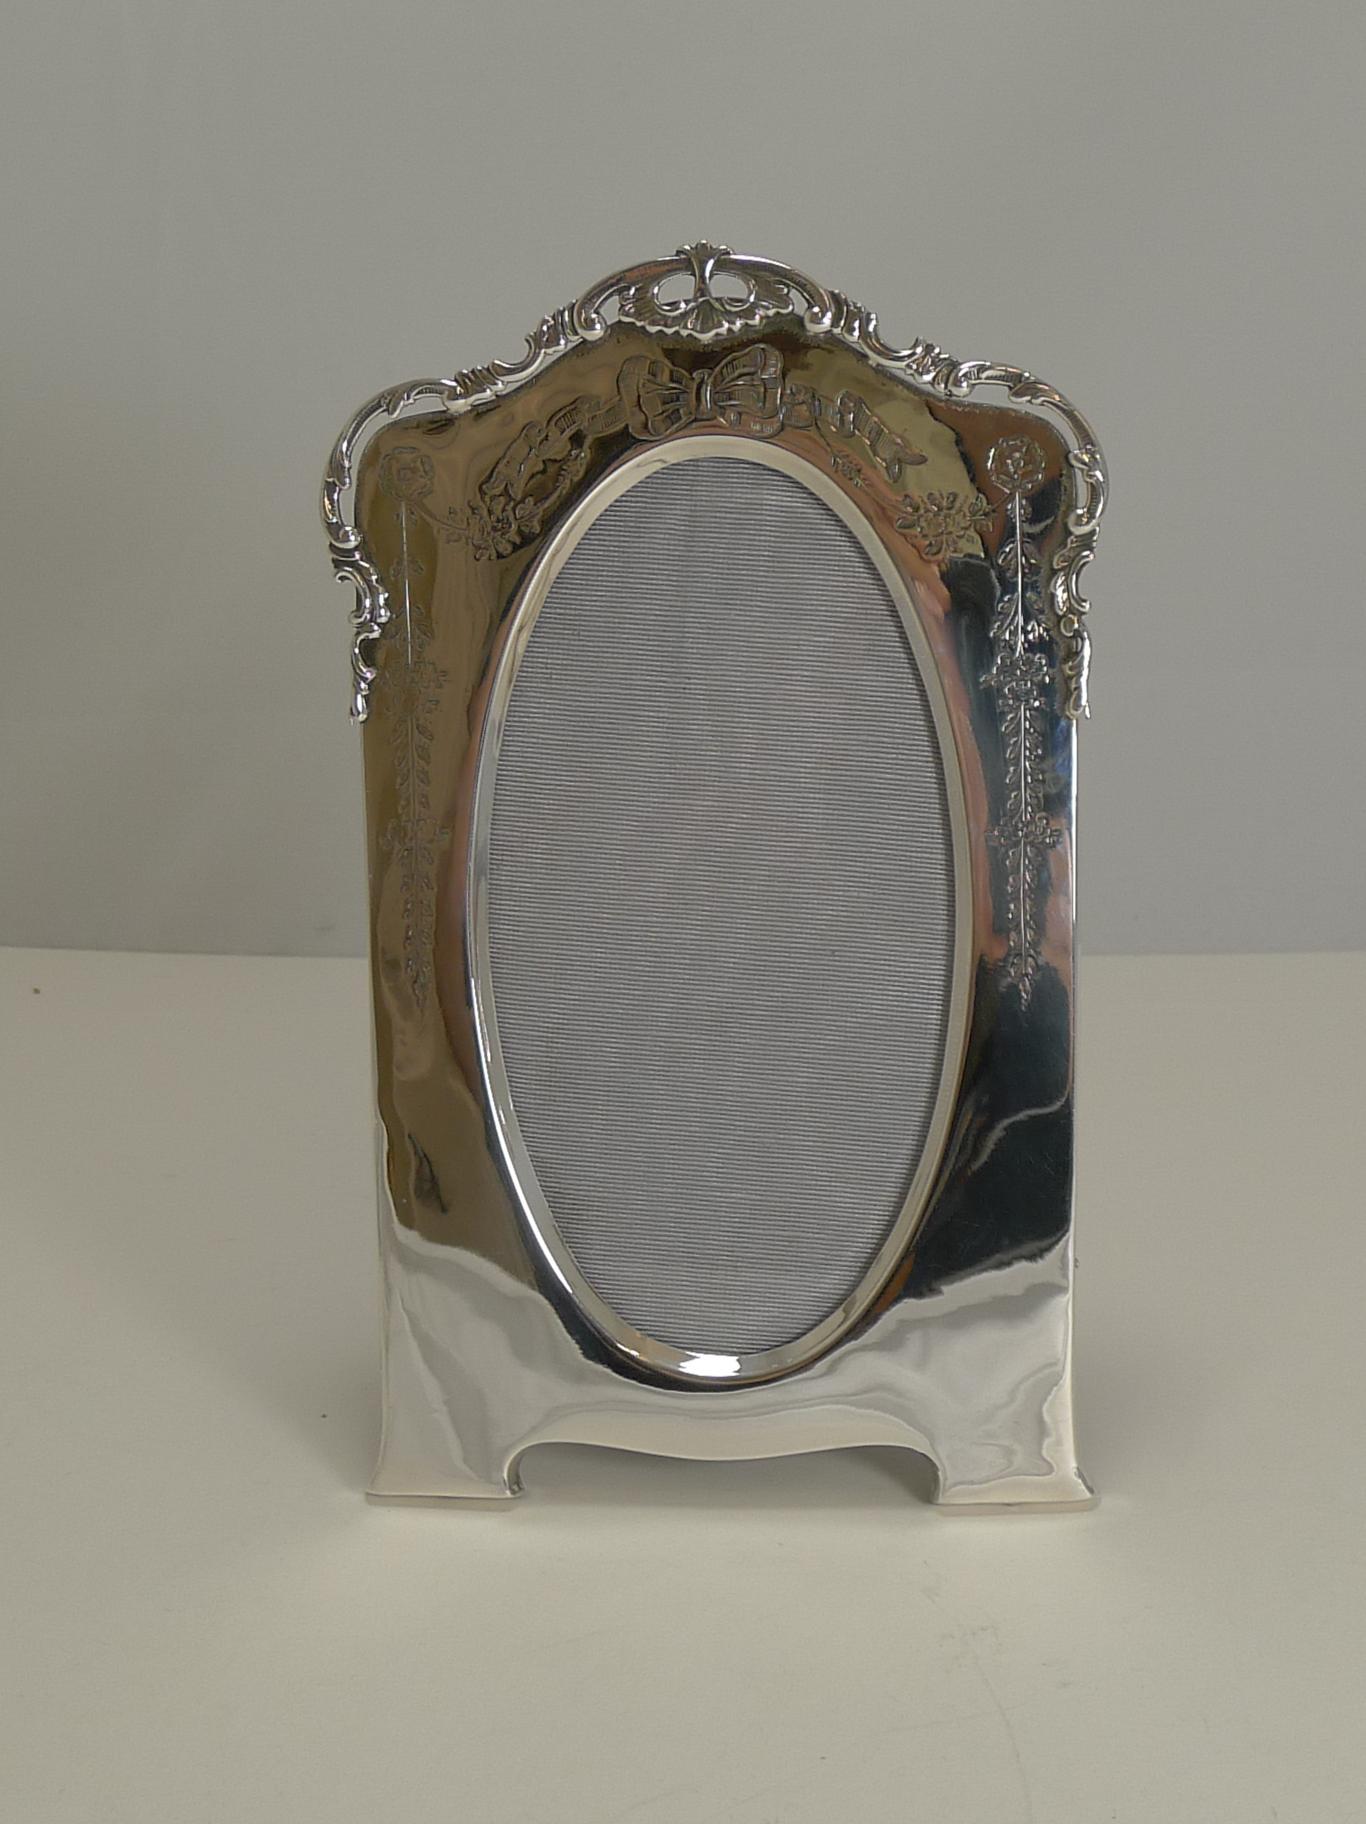 A really stunning Edwardian photograph frame made from English sterling silver on a solid oak backing with integral folding easel stand.

The beautifully shaped frame is topped with a shaped cast border with pierced or reticulated detail and hand